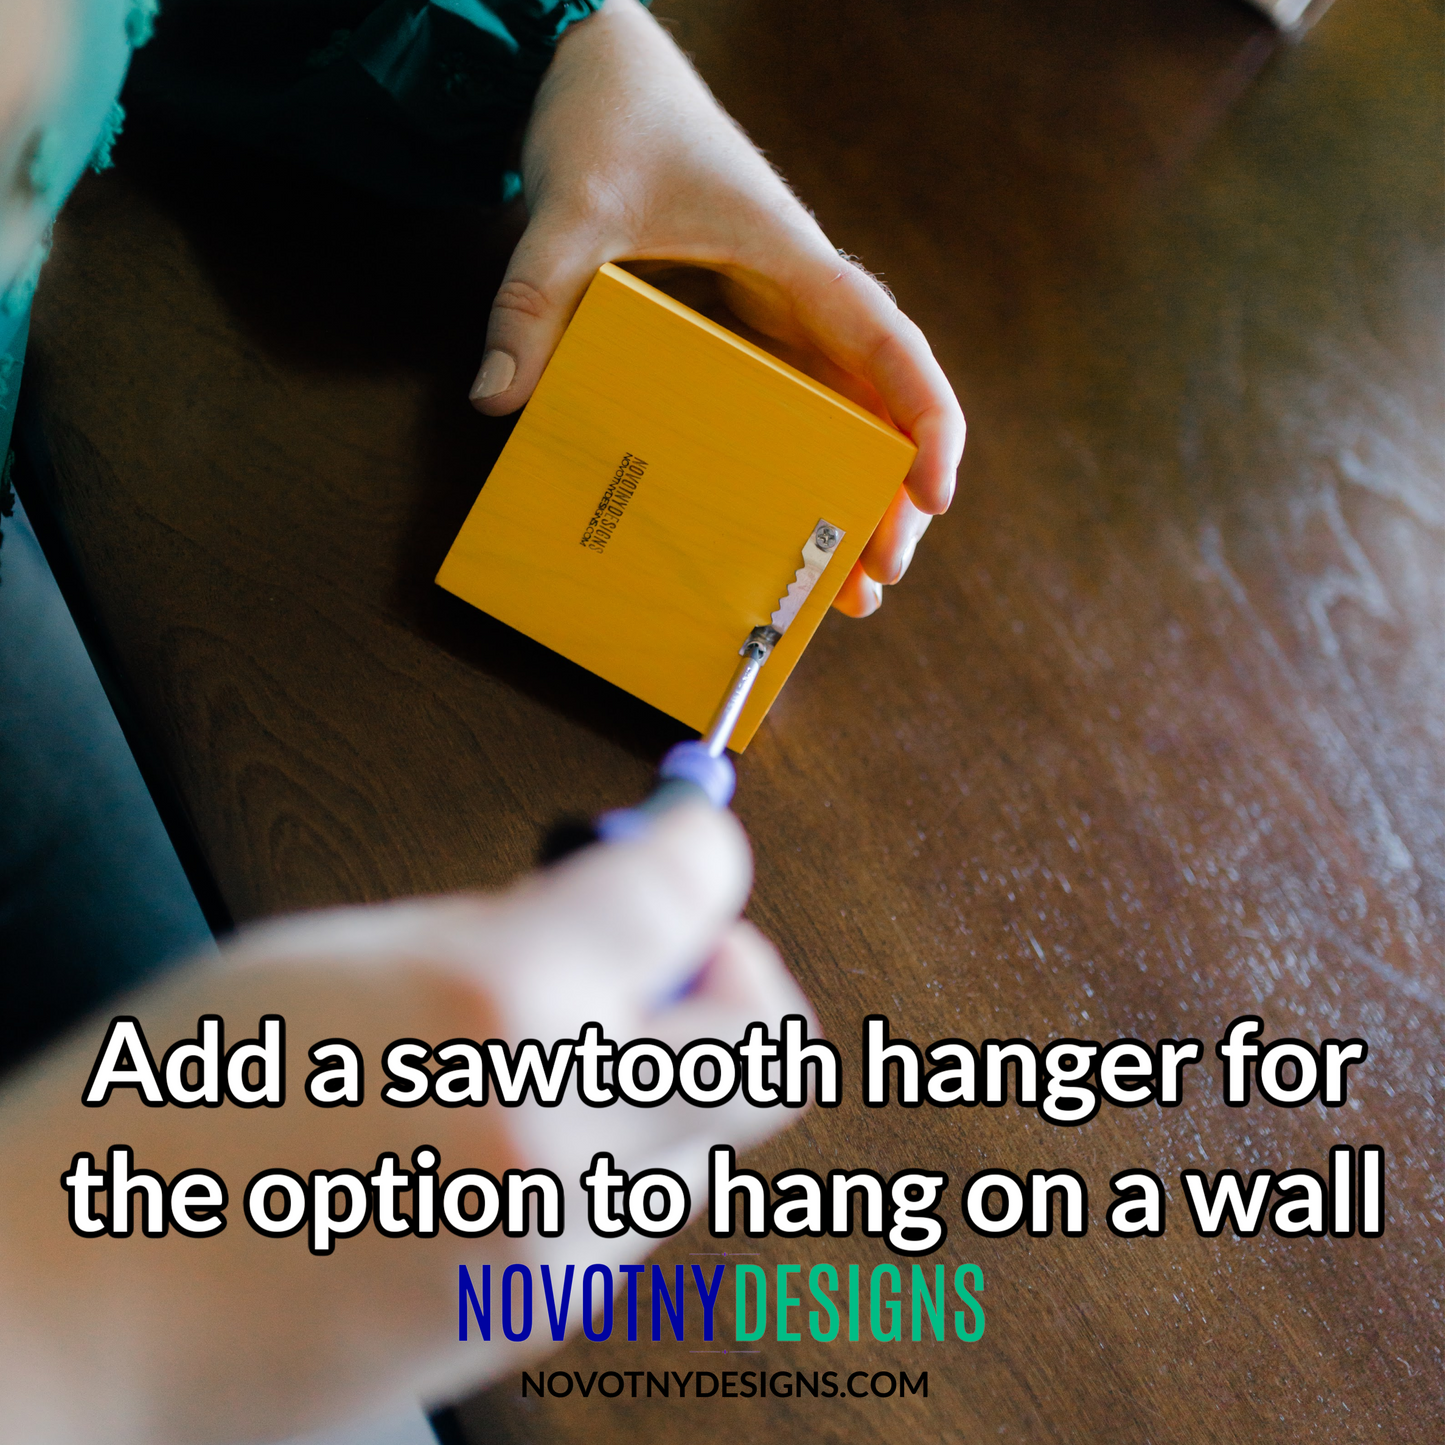 Add a sawtooth hanger to the reverse to hang on a wall